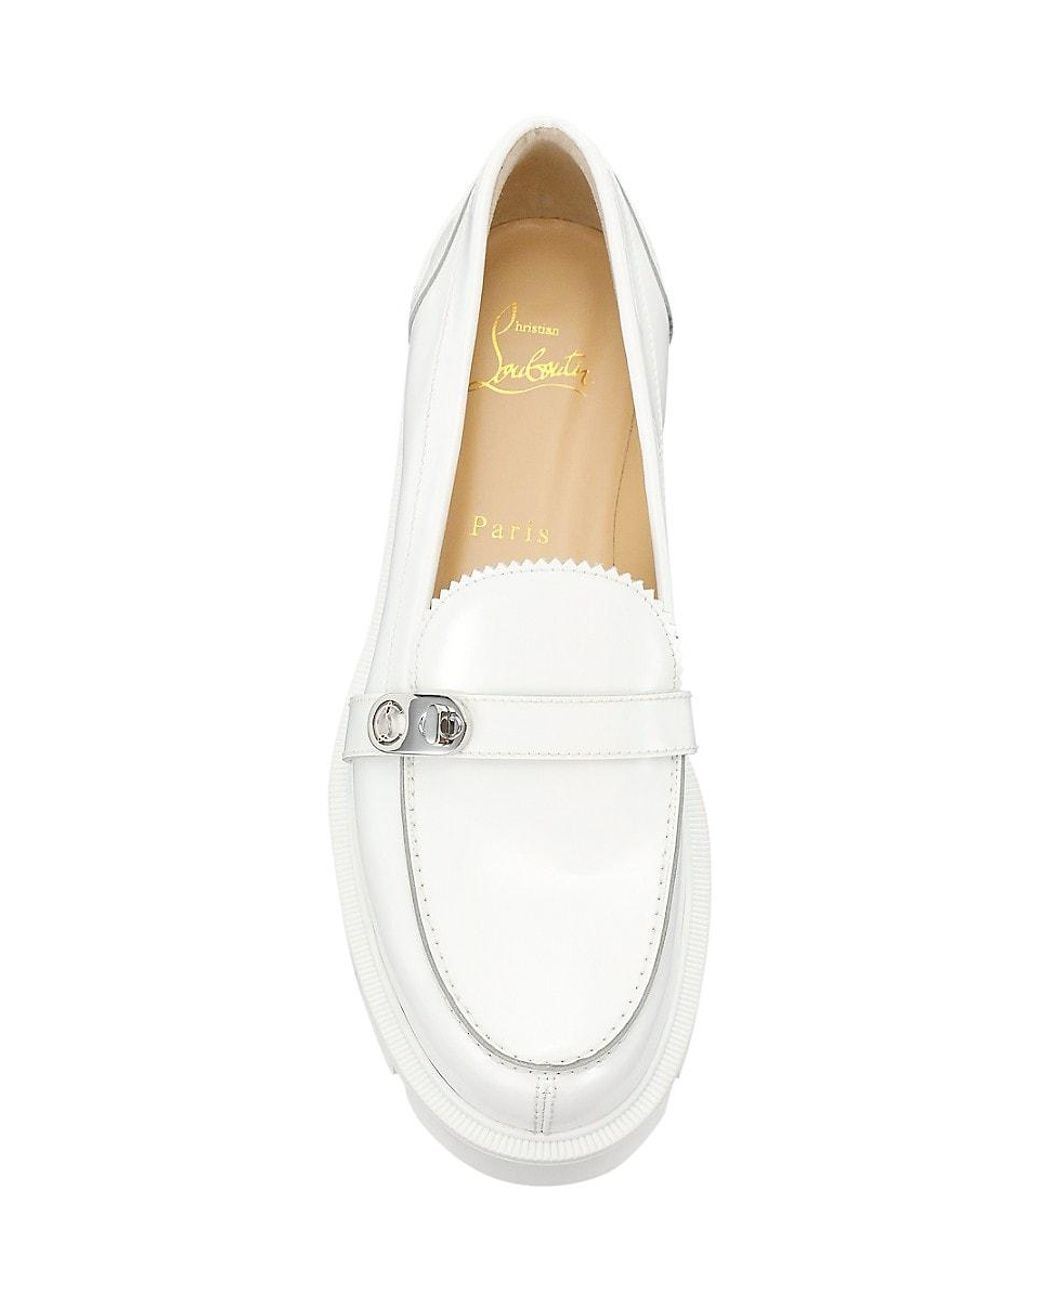 CHRISTIAN LOUBOUTIN Lug Sole Loafer in White - More Than You Can Imagine